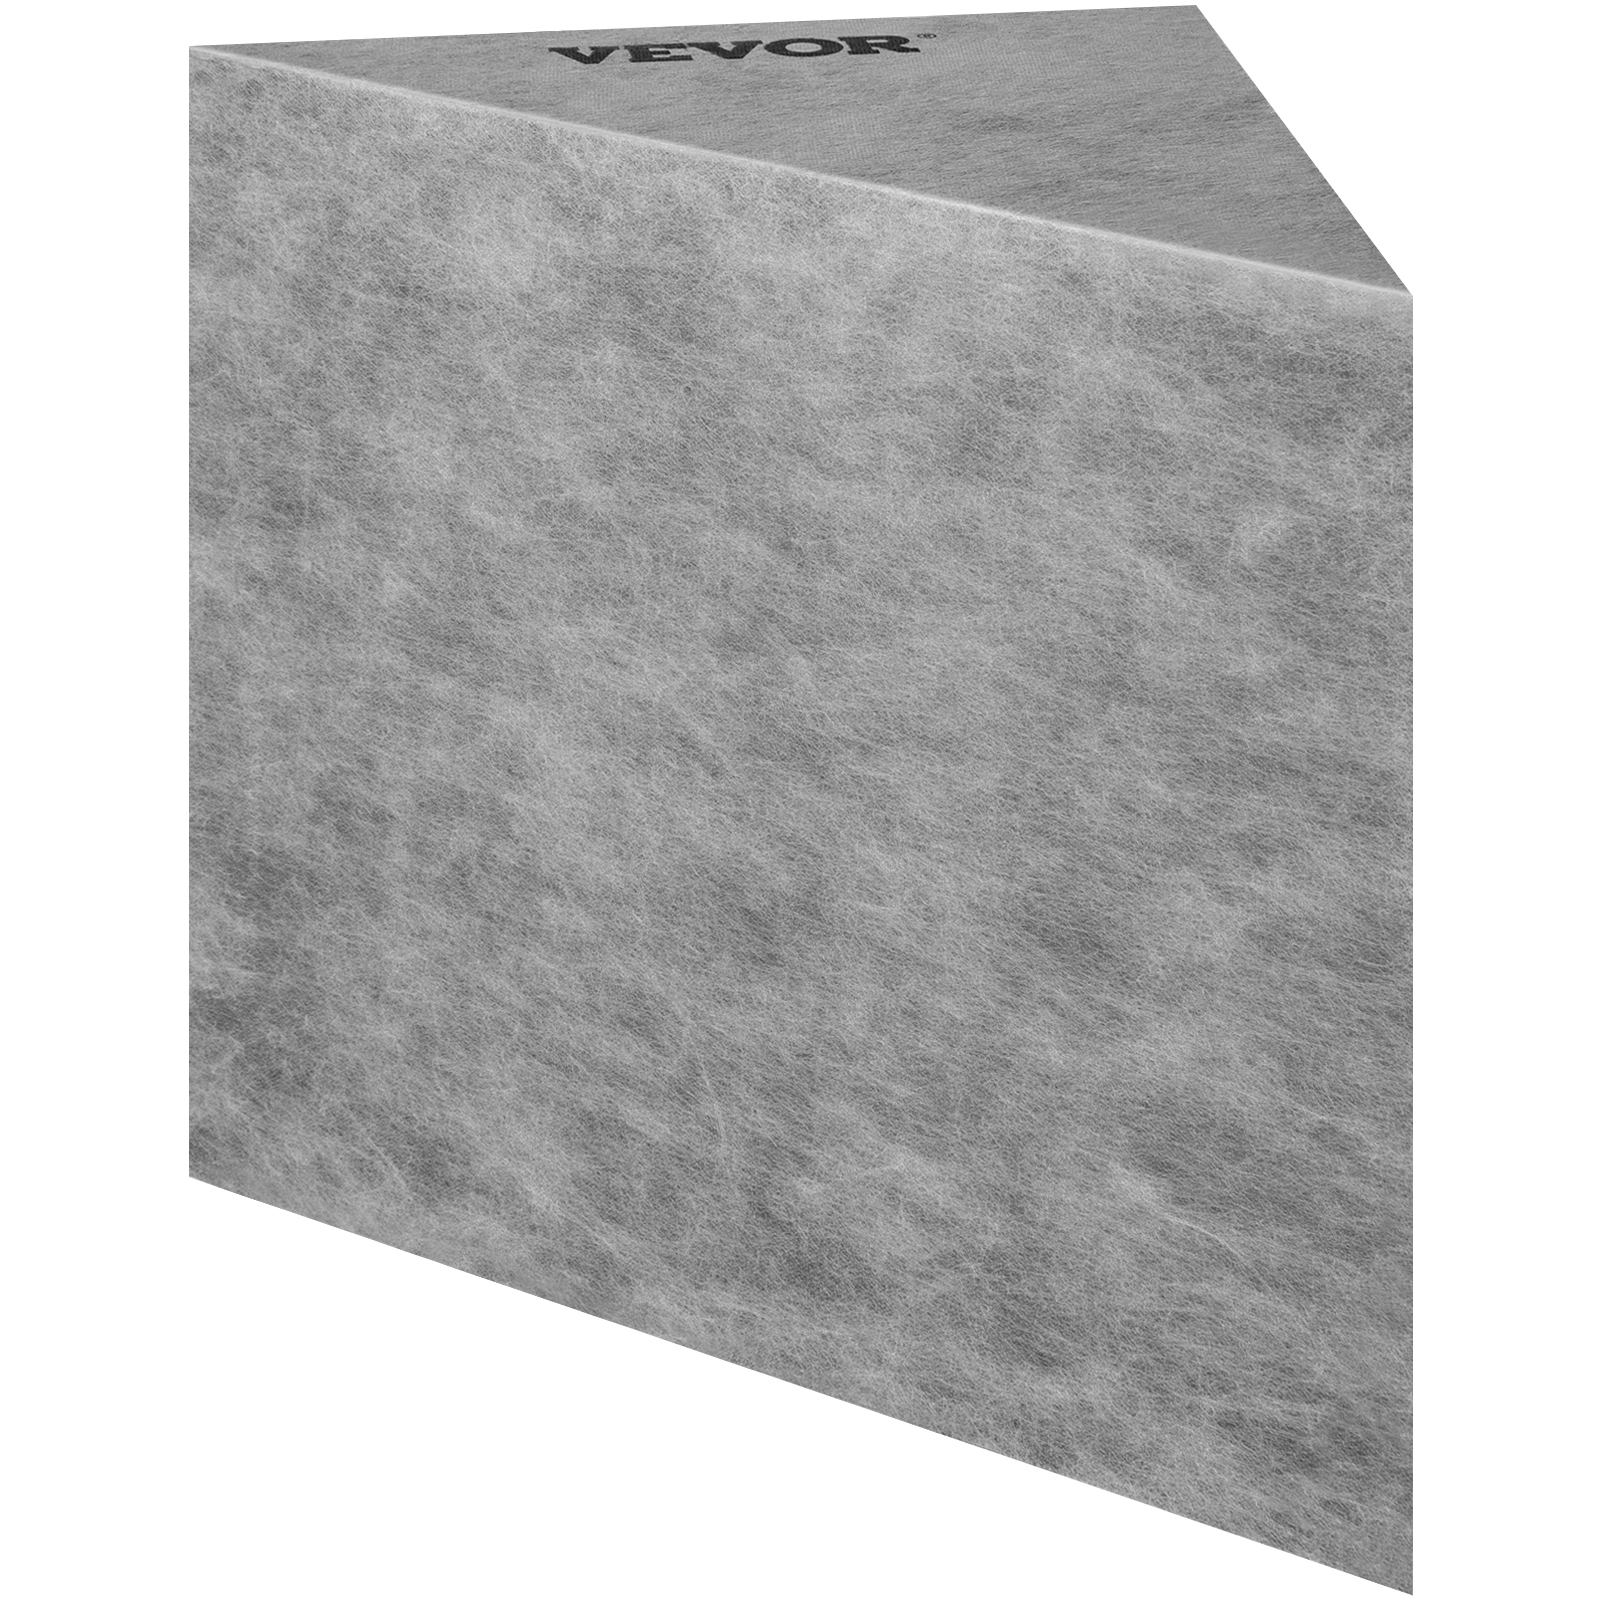 Tile Shower Seat,Rectangle,440 lbs Loading